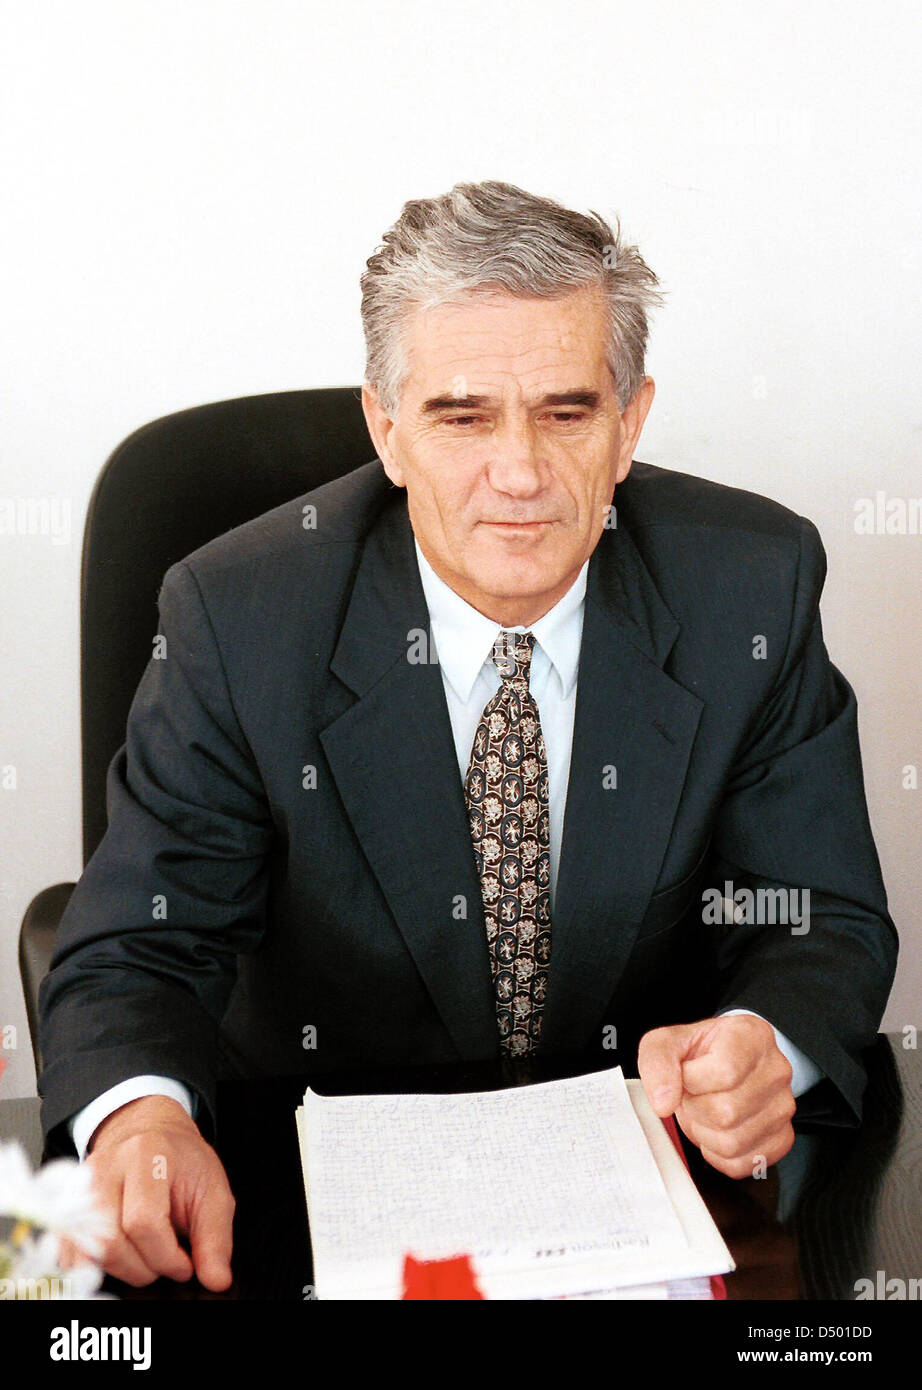 PALE, BOSNIA, 12 JUNE 1996 ------- Bosnian Serb foreign minister Alexi Buha, seen here in his office in the Bosnian town of Pale. Buha was a close ally to Bosnian Serb war criminal Radovan Karadzic, and is suspected of having been one of the chief ideologues behind the Serb ethnic cleansing campaign in Bosnia. It is thought that Buha is under secret indictment by the War Crimes Tribunal in the Hugue. Stock Photo